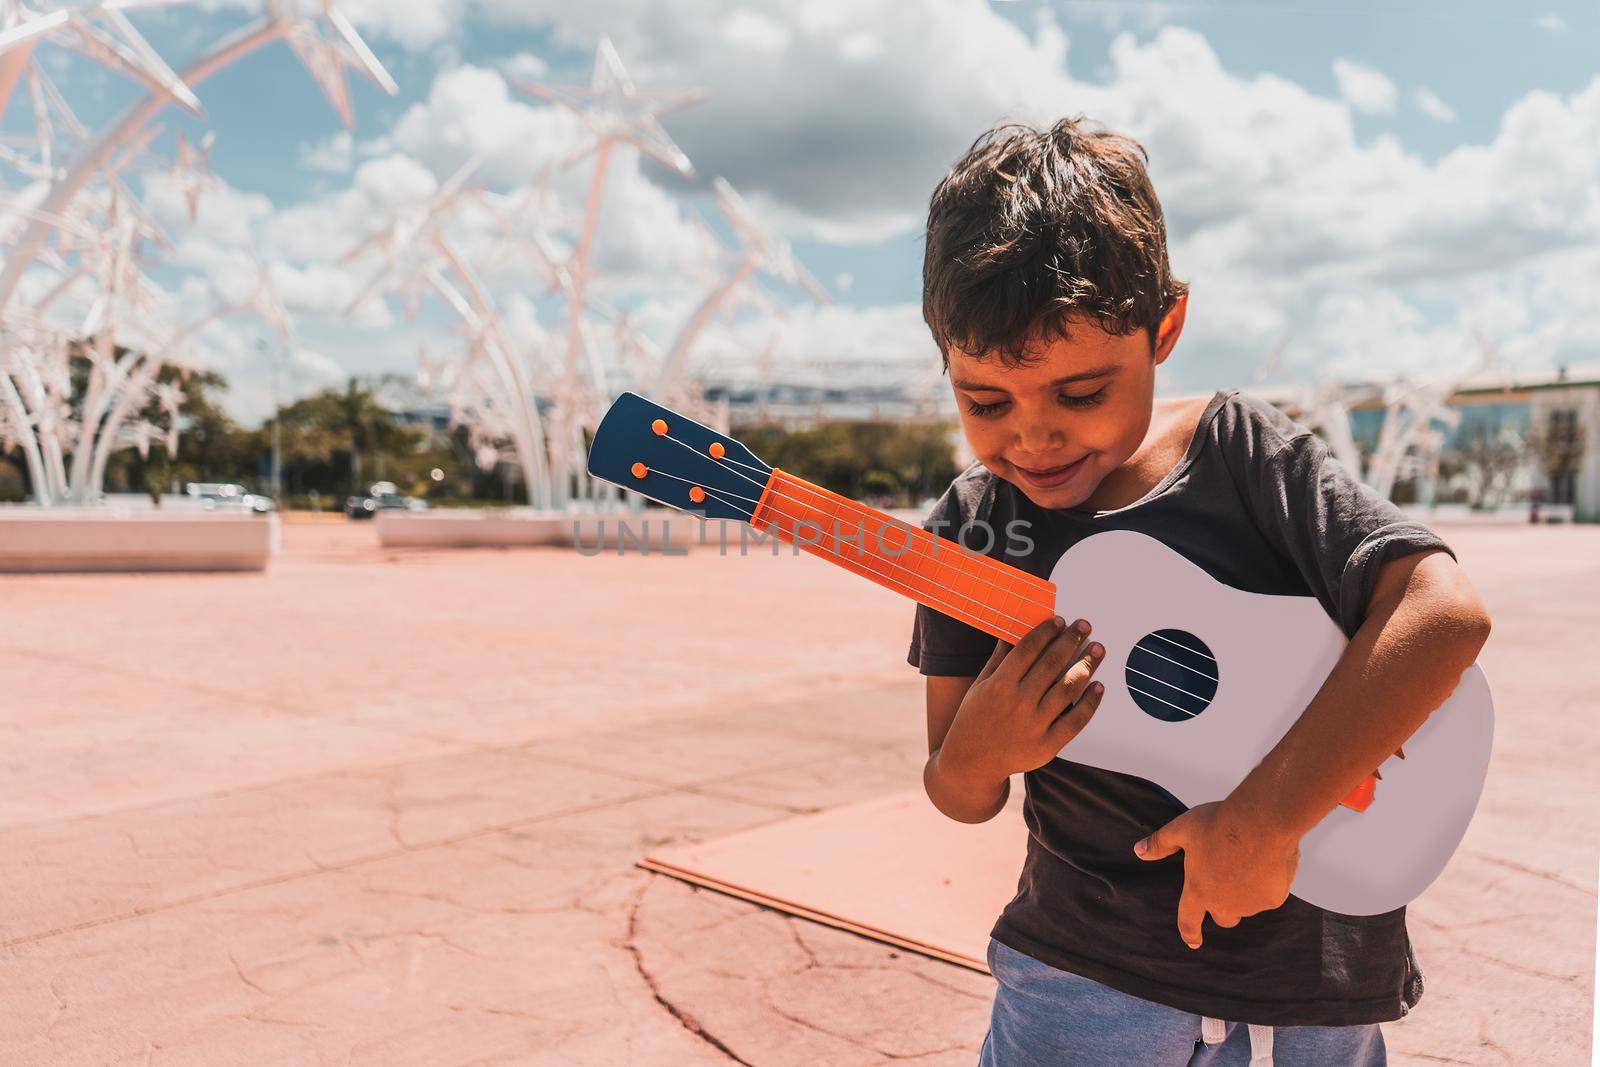 Moody photo of a Latino boy playing a ukulele in a public plaza in Managua Nicaragua